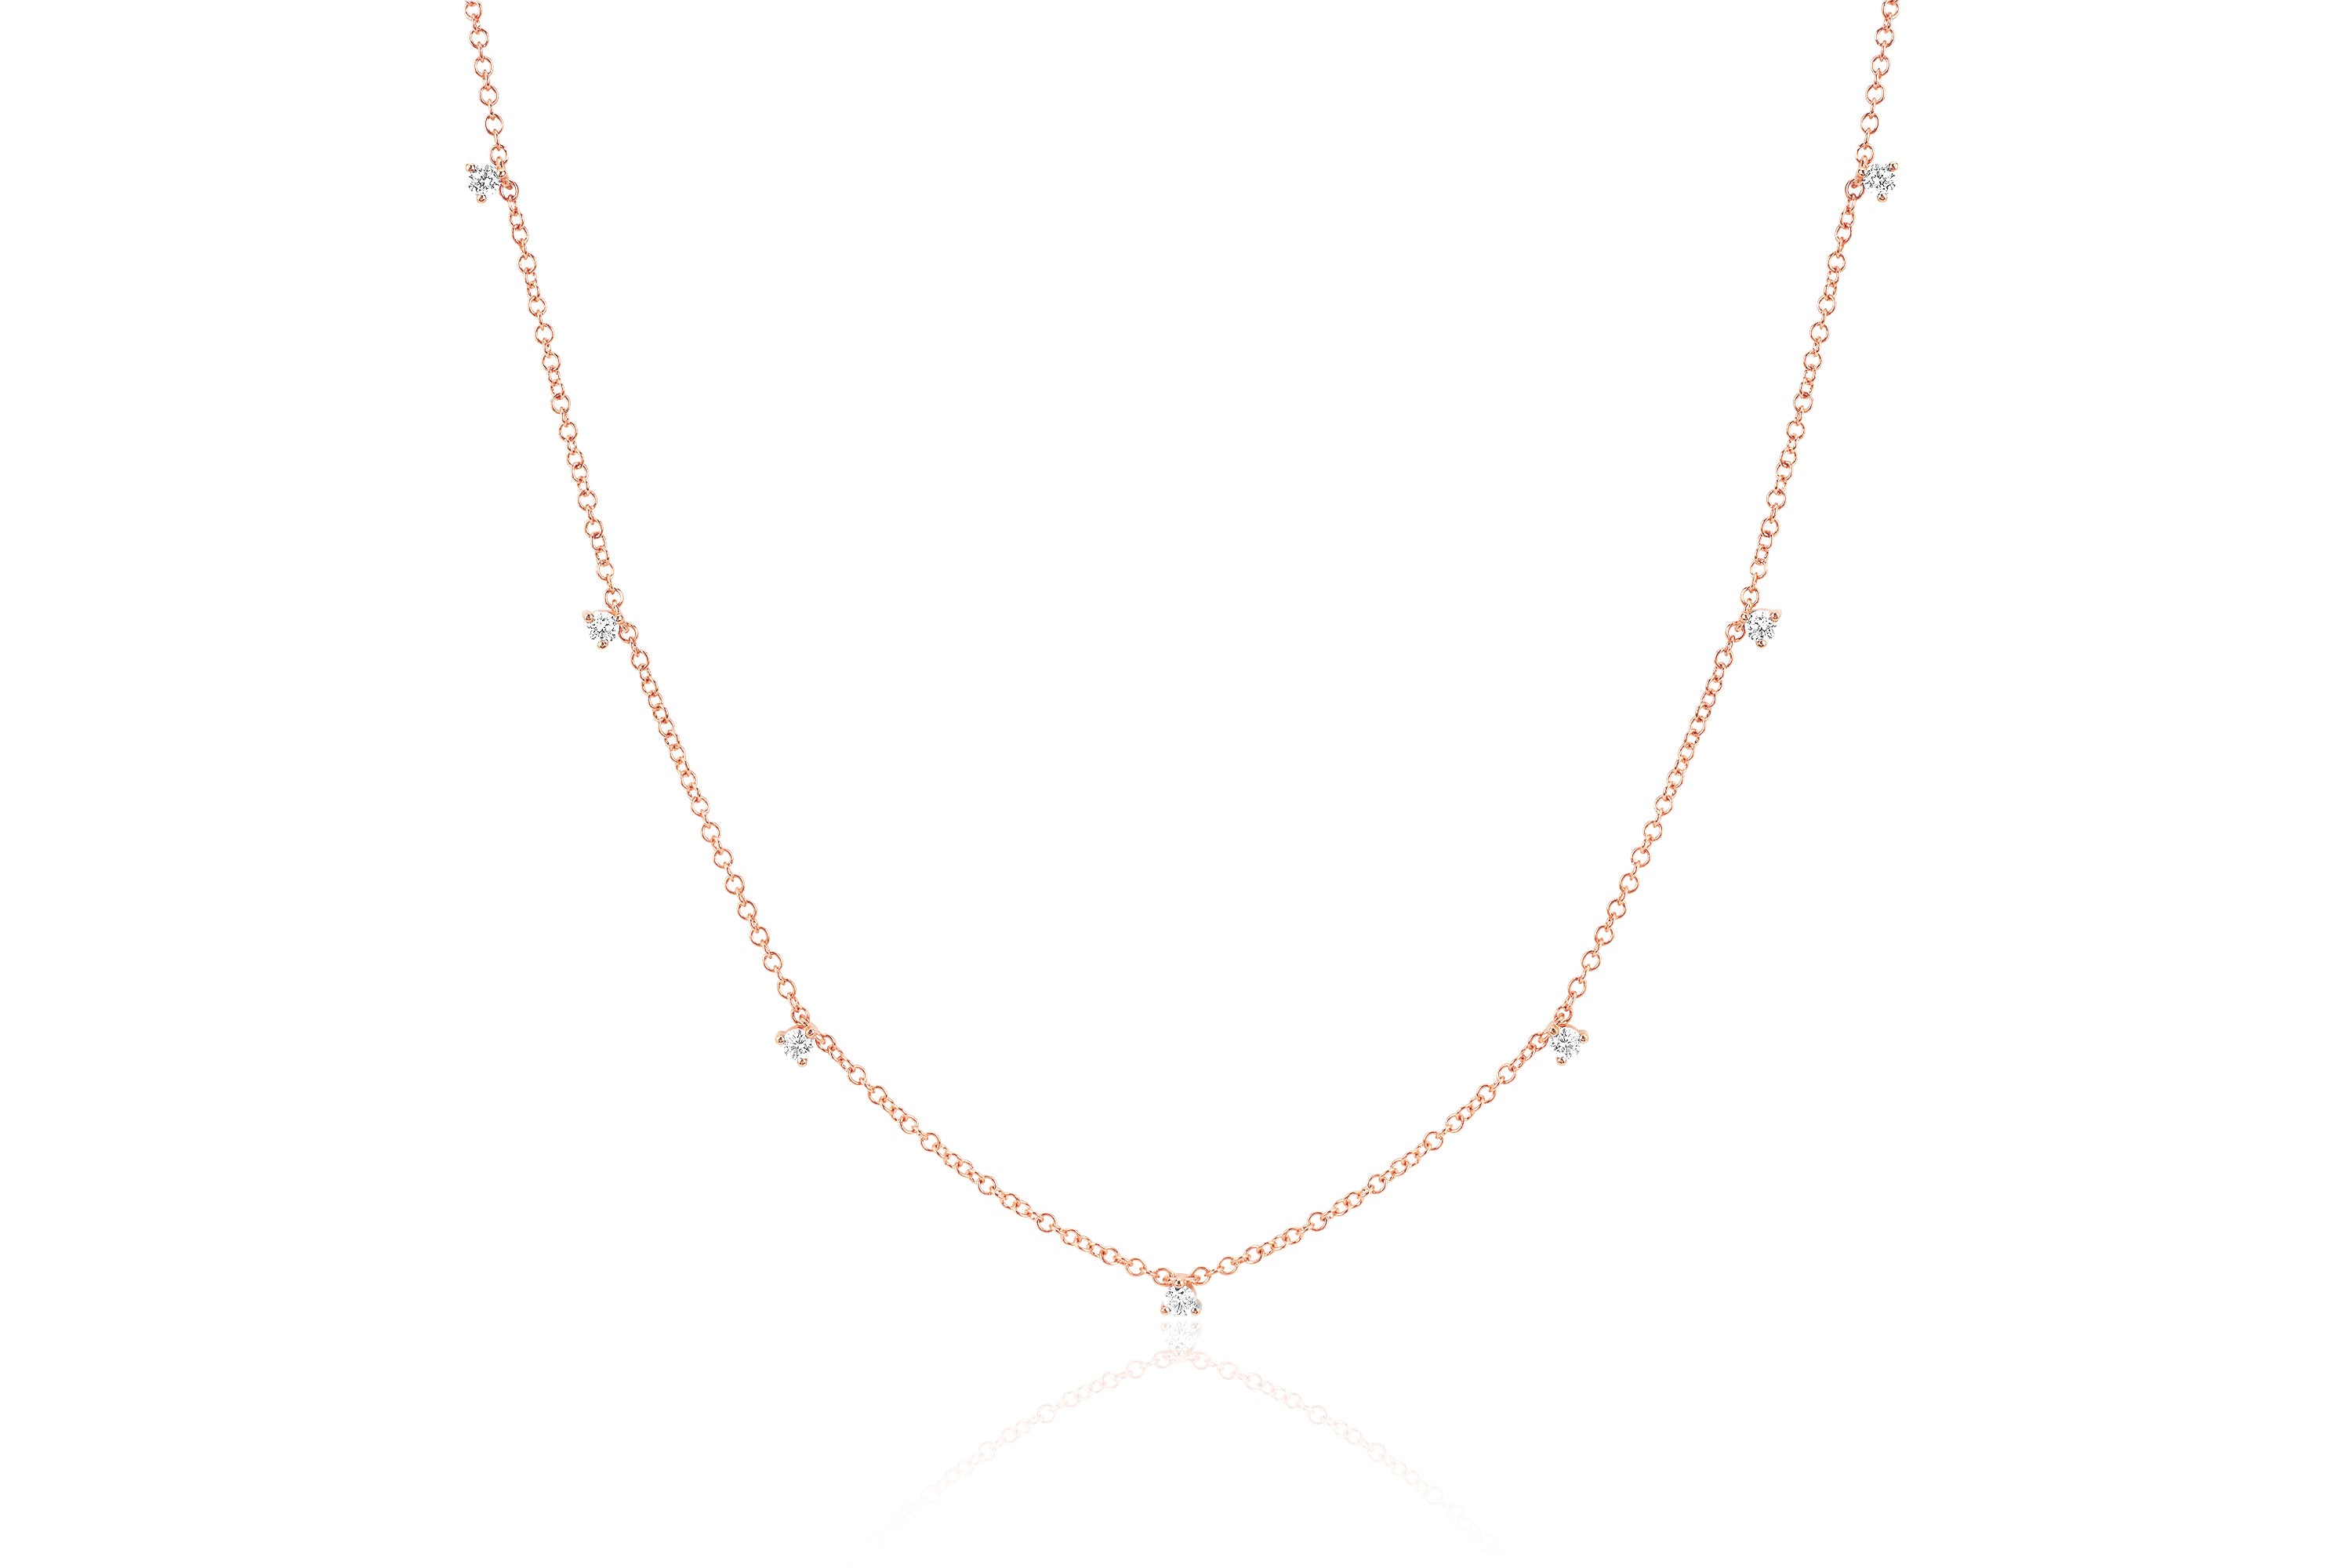 7 Prong Set Diamond Necklace in 14k rose gold